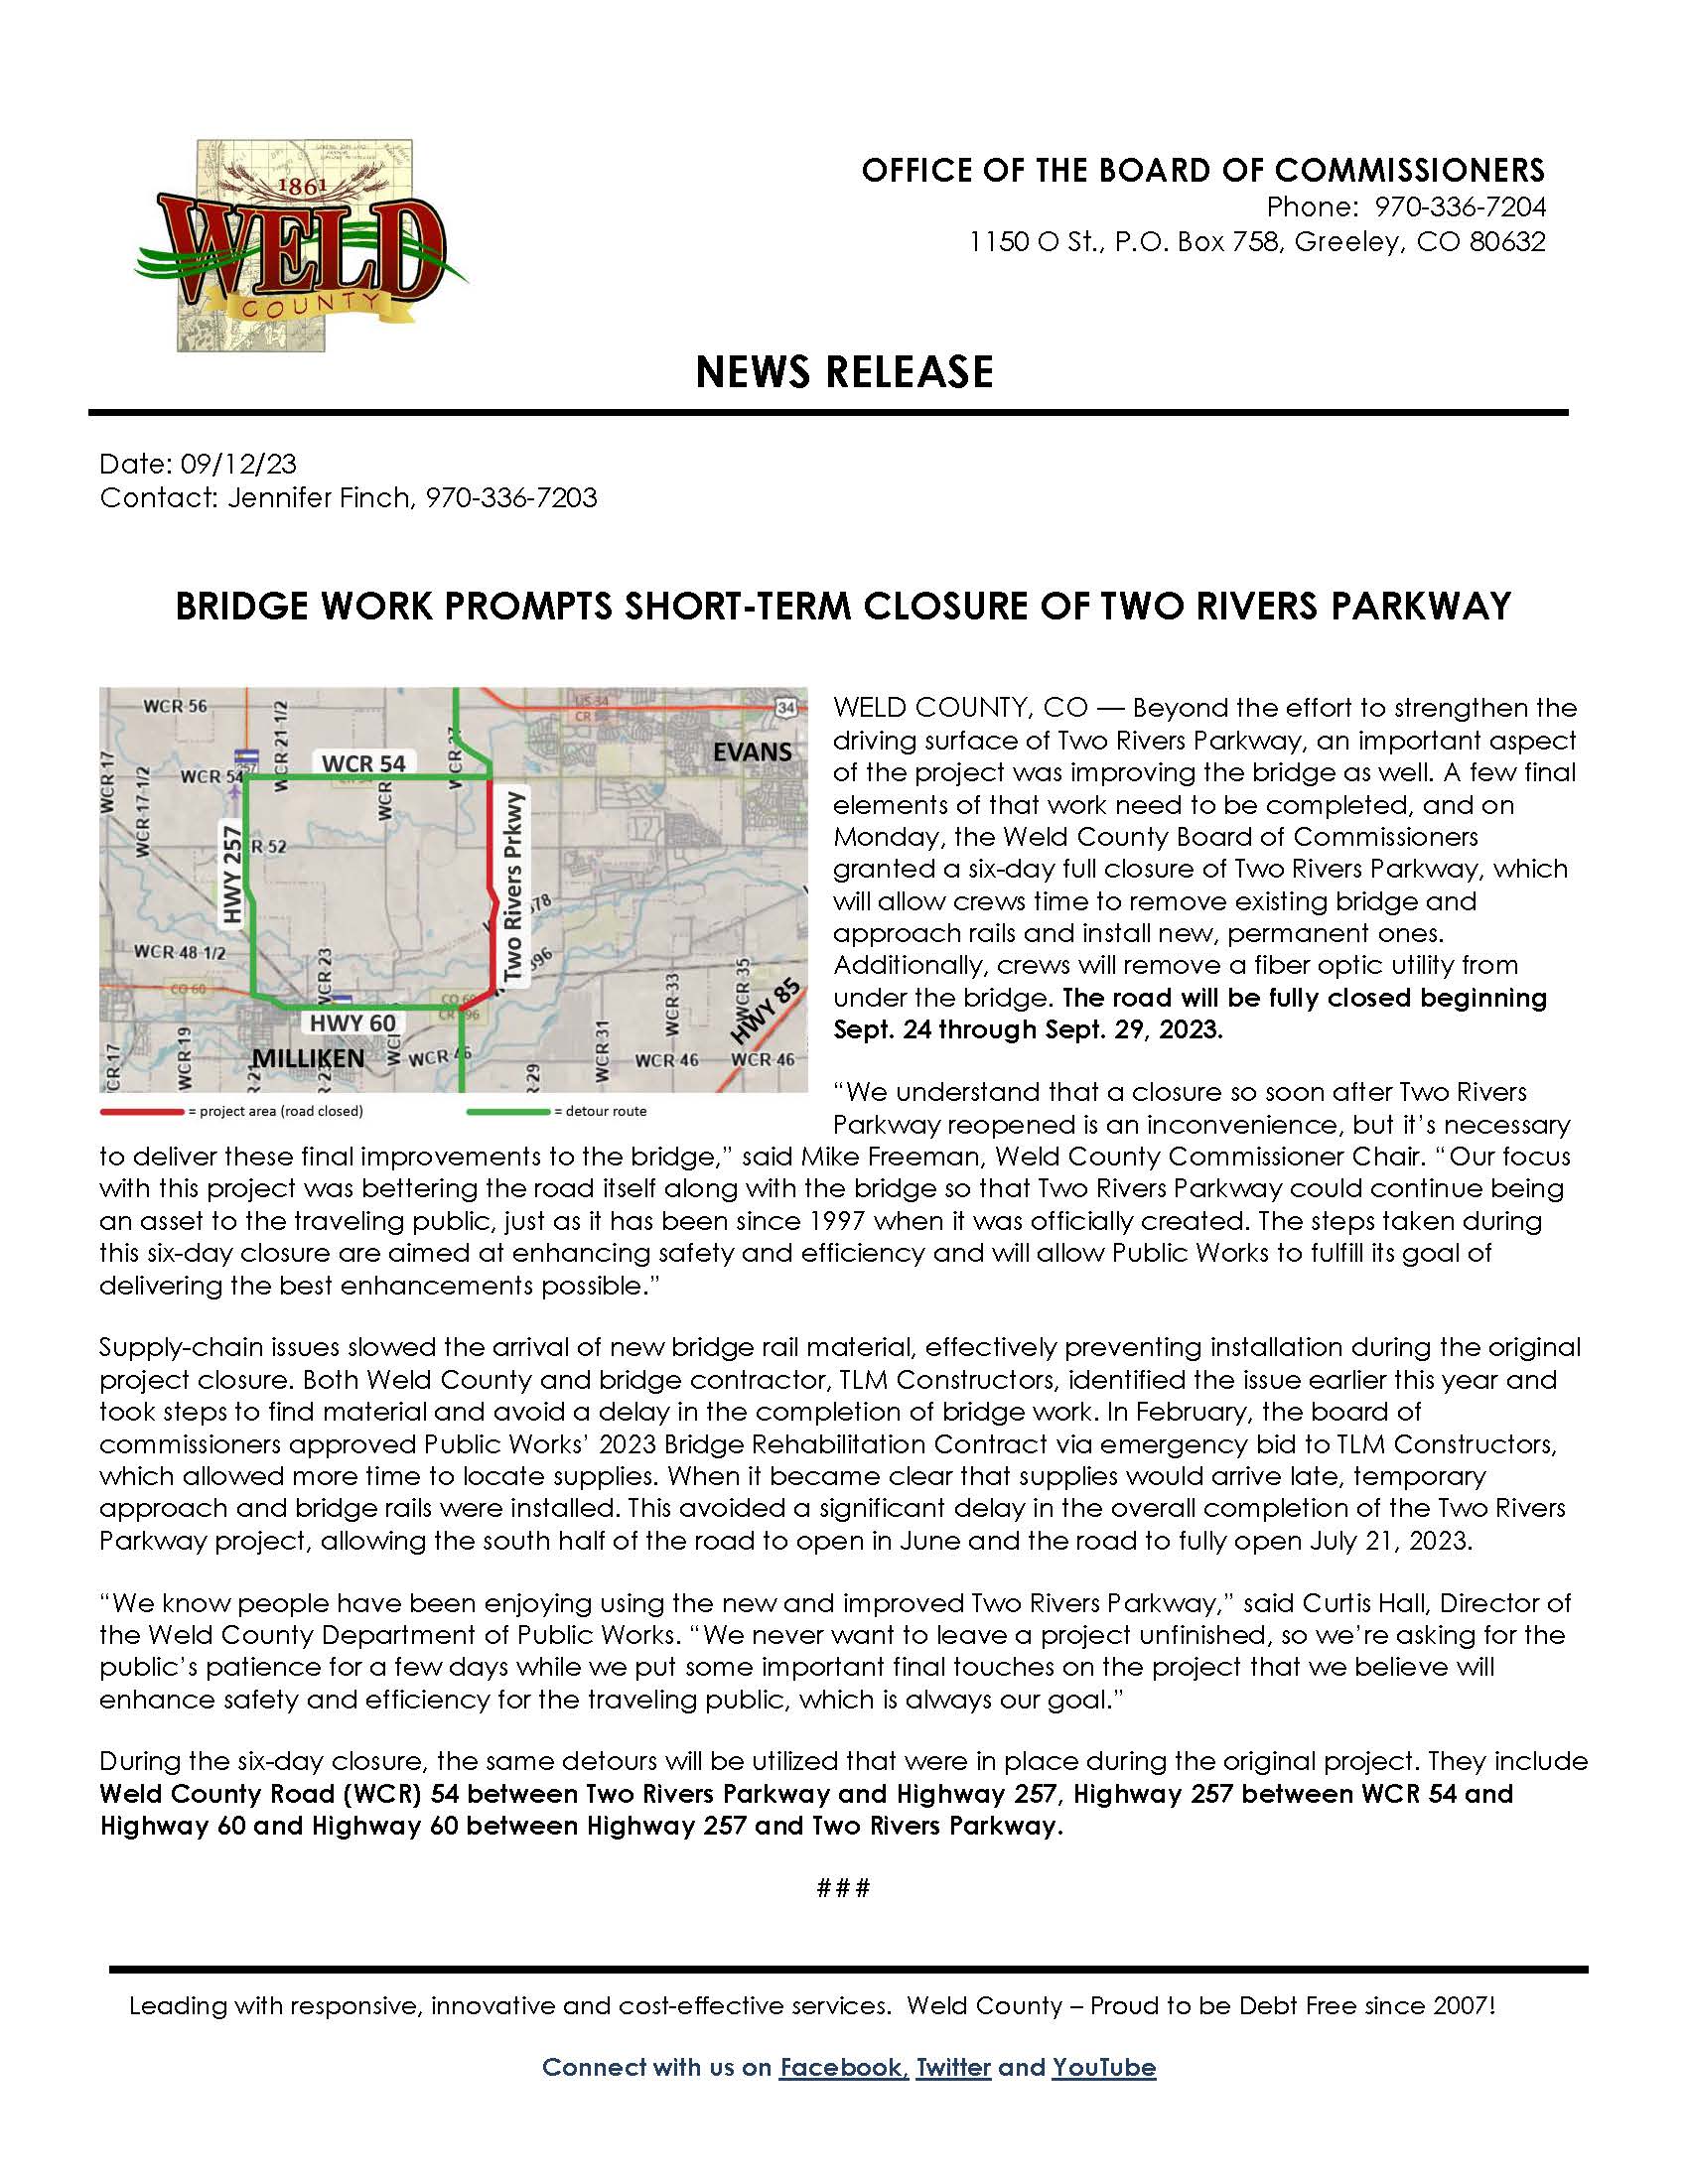 091223_Two Rivers Parkway short-term closure